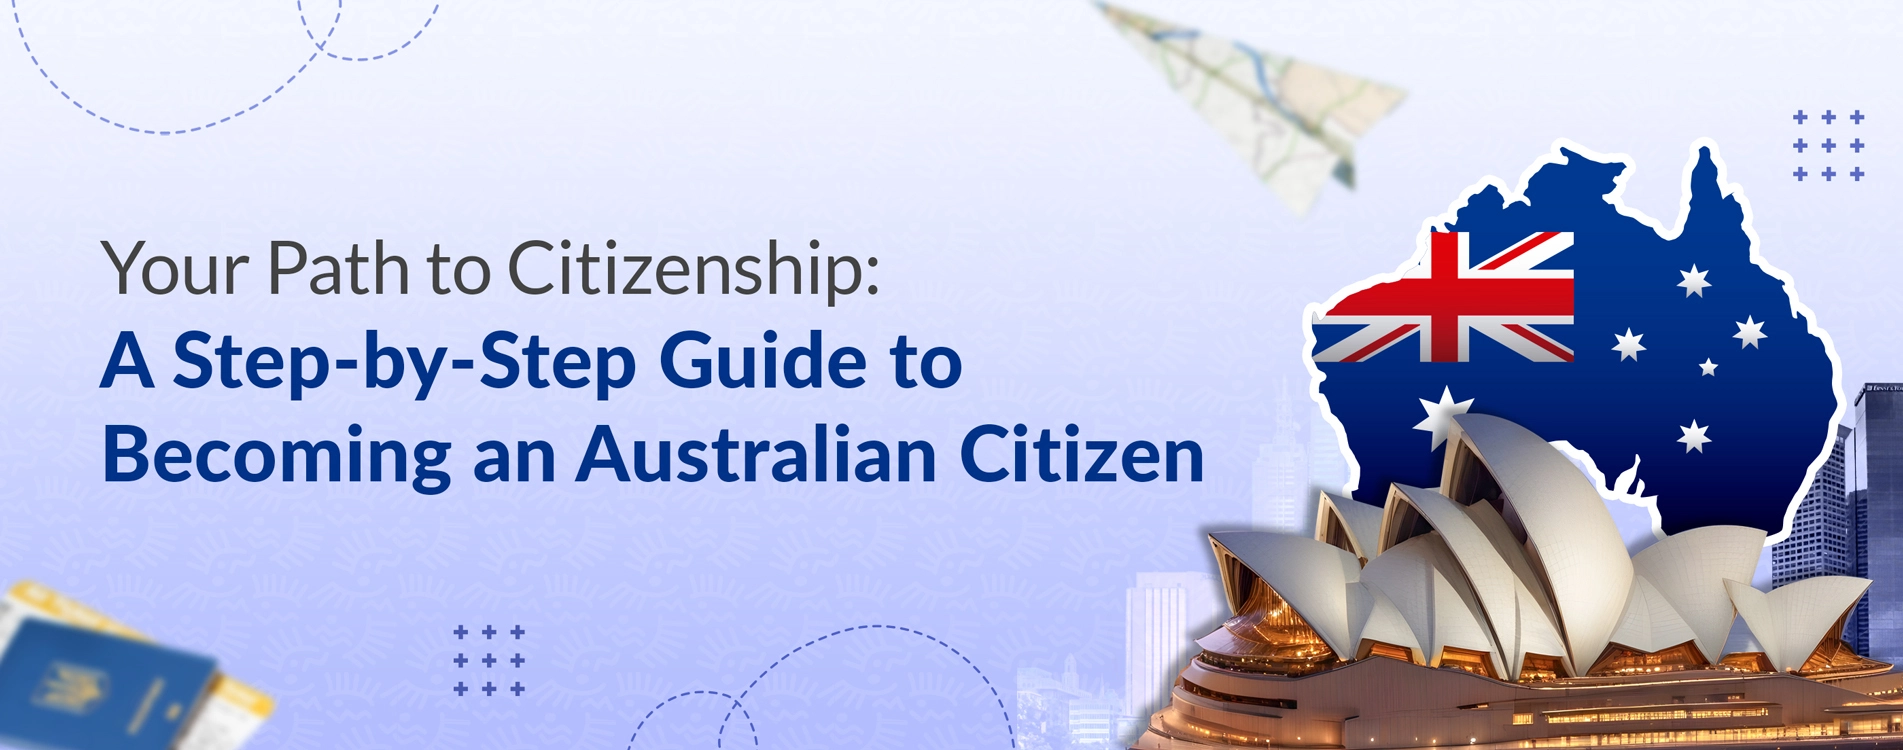 Your Path to Citizenship: A Step-by-Step Guide to Becoming an Australian Citizen